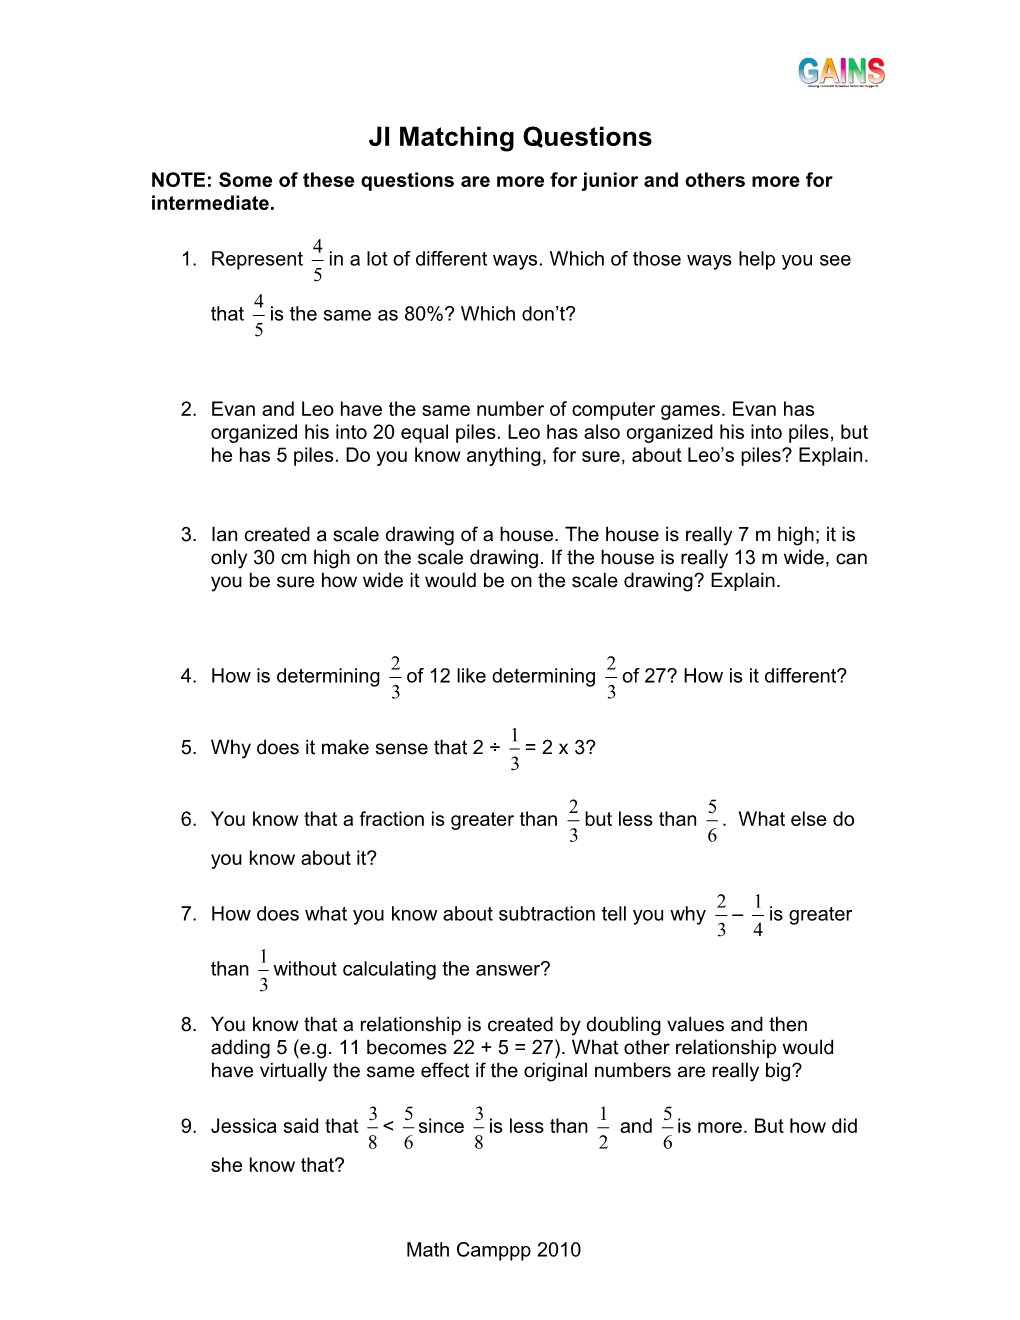 NOTE: Some of These Questions Are More for Junior and Others More for Intermediate